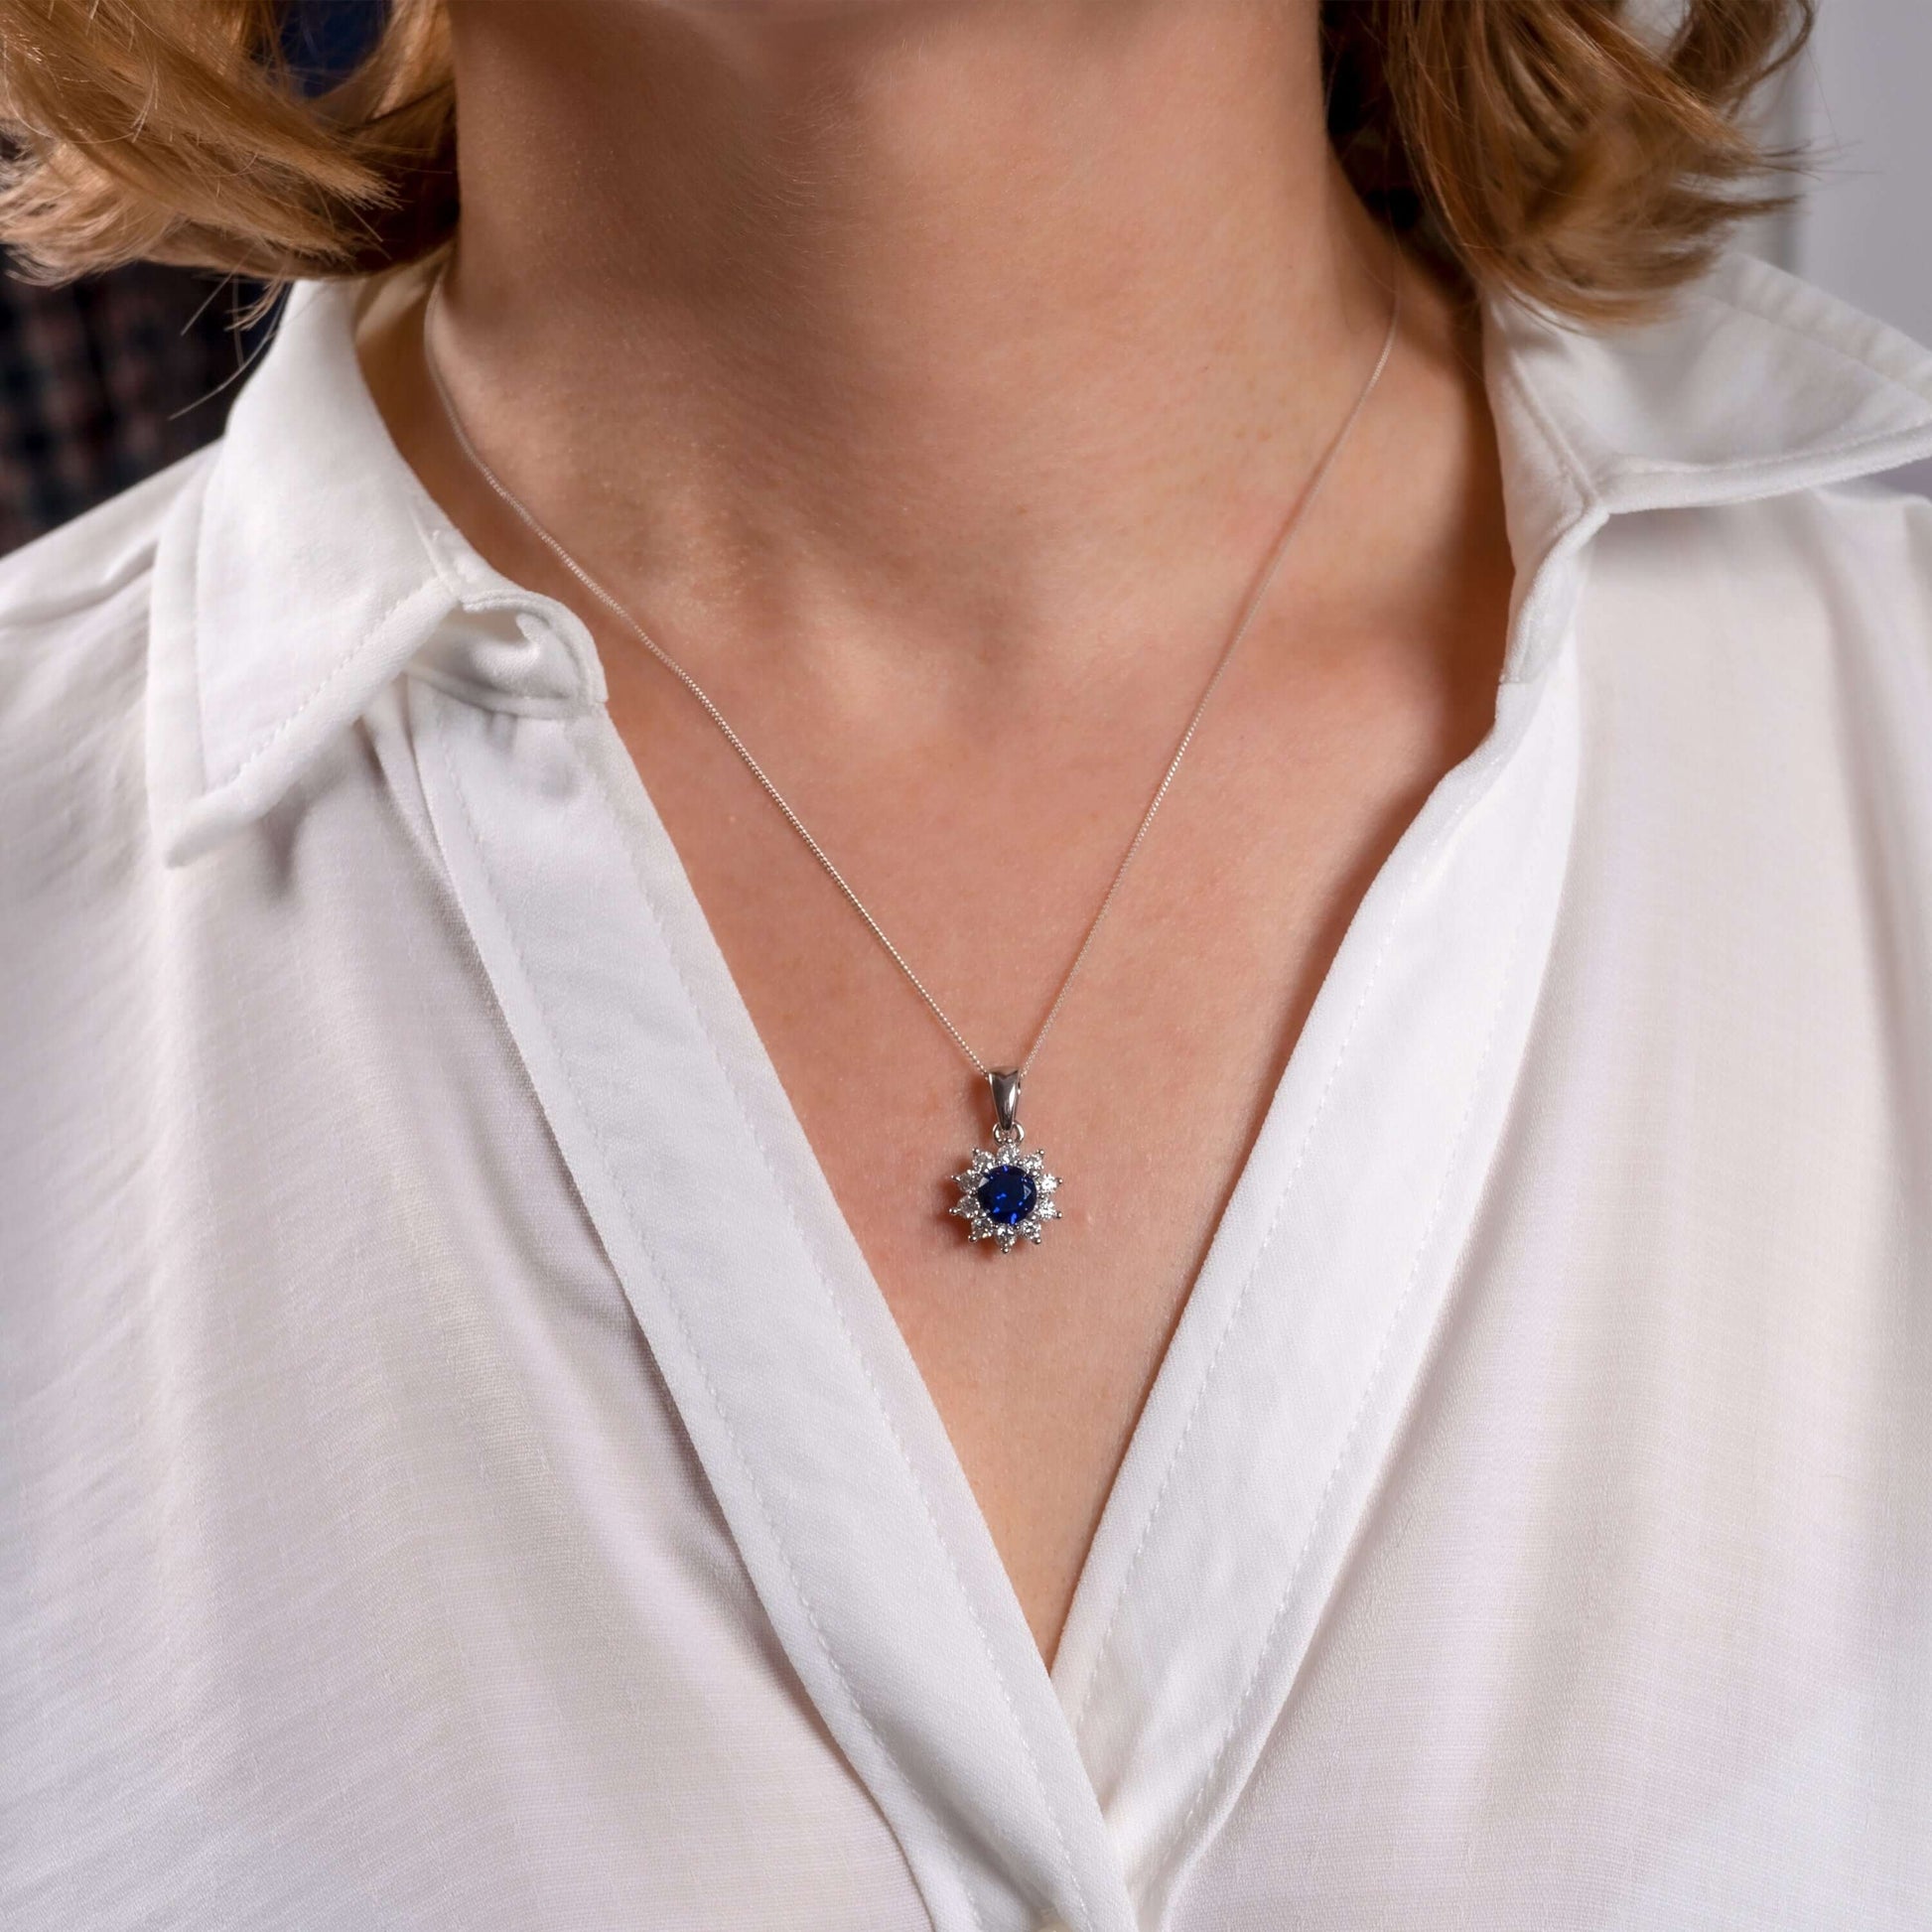 Sophisticated Silver Necklace Featuring Lab-Grown Sapphire